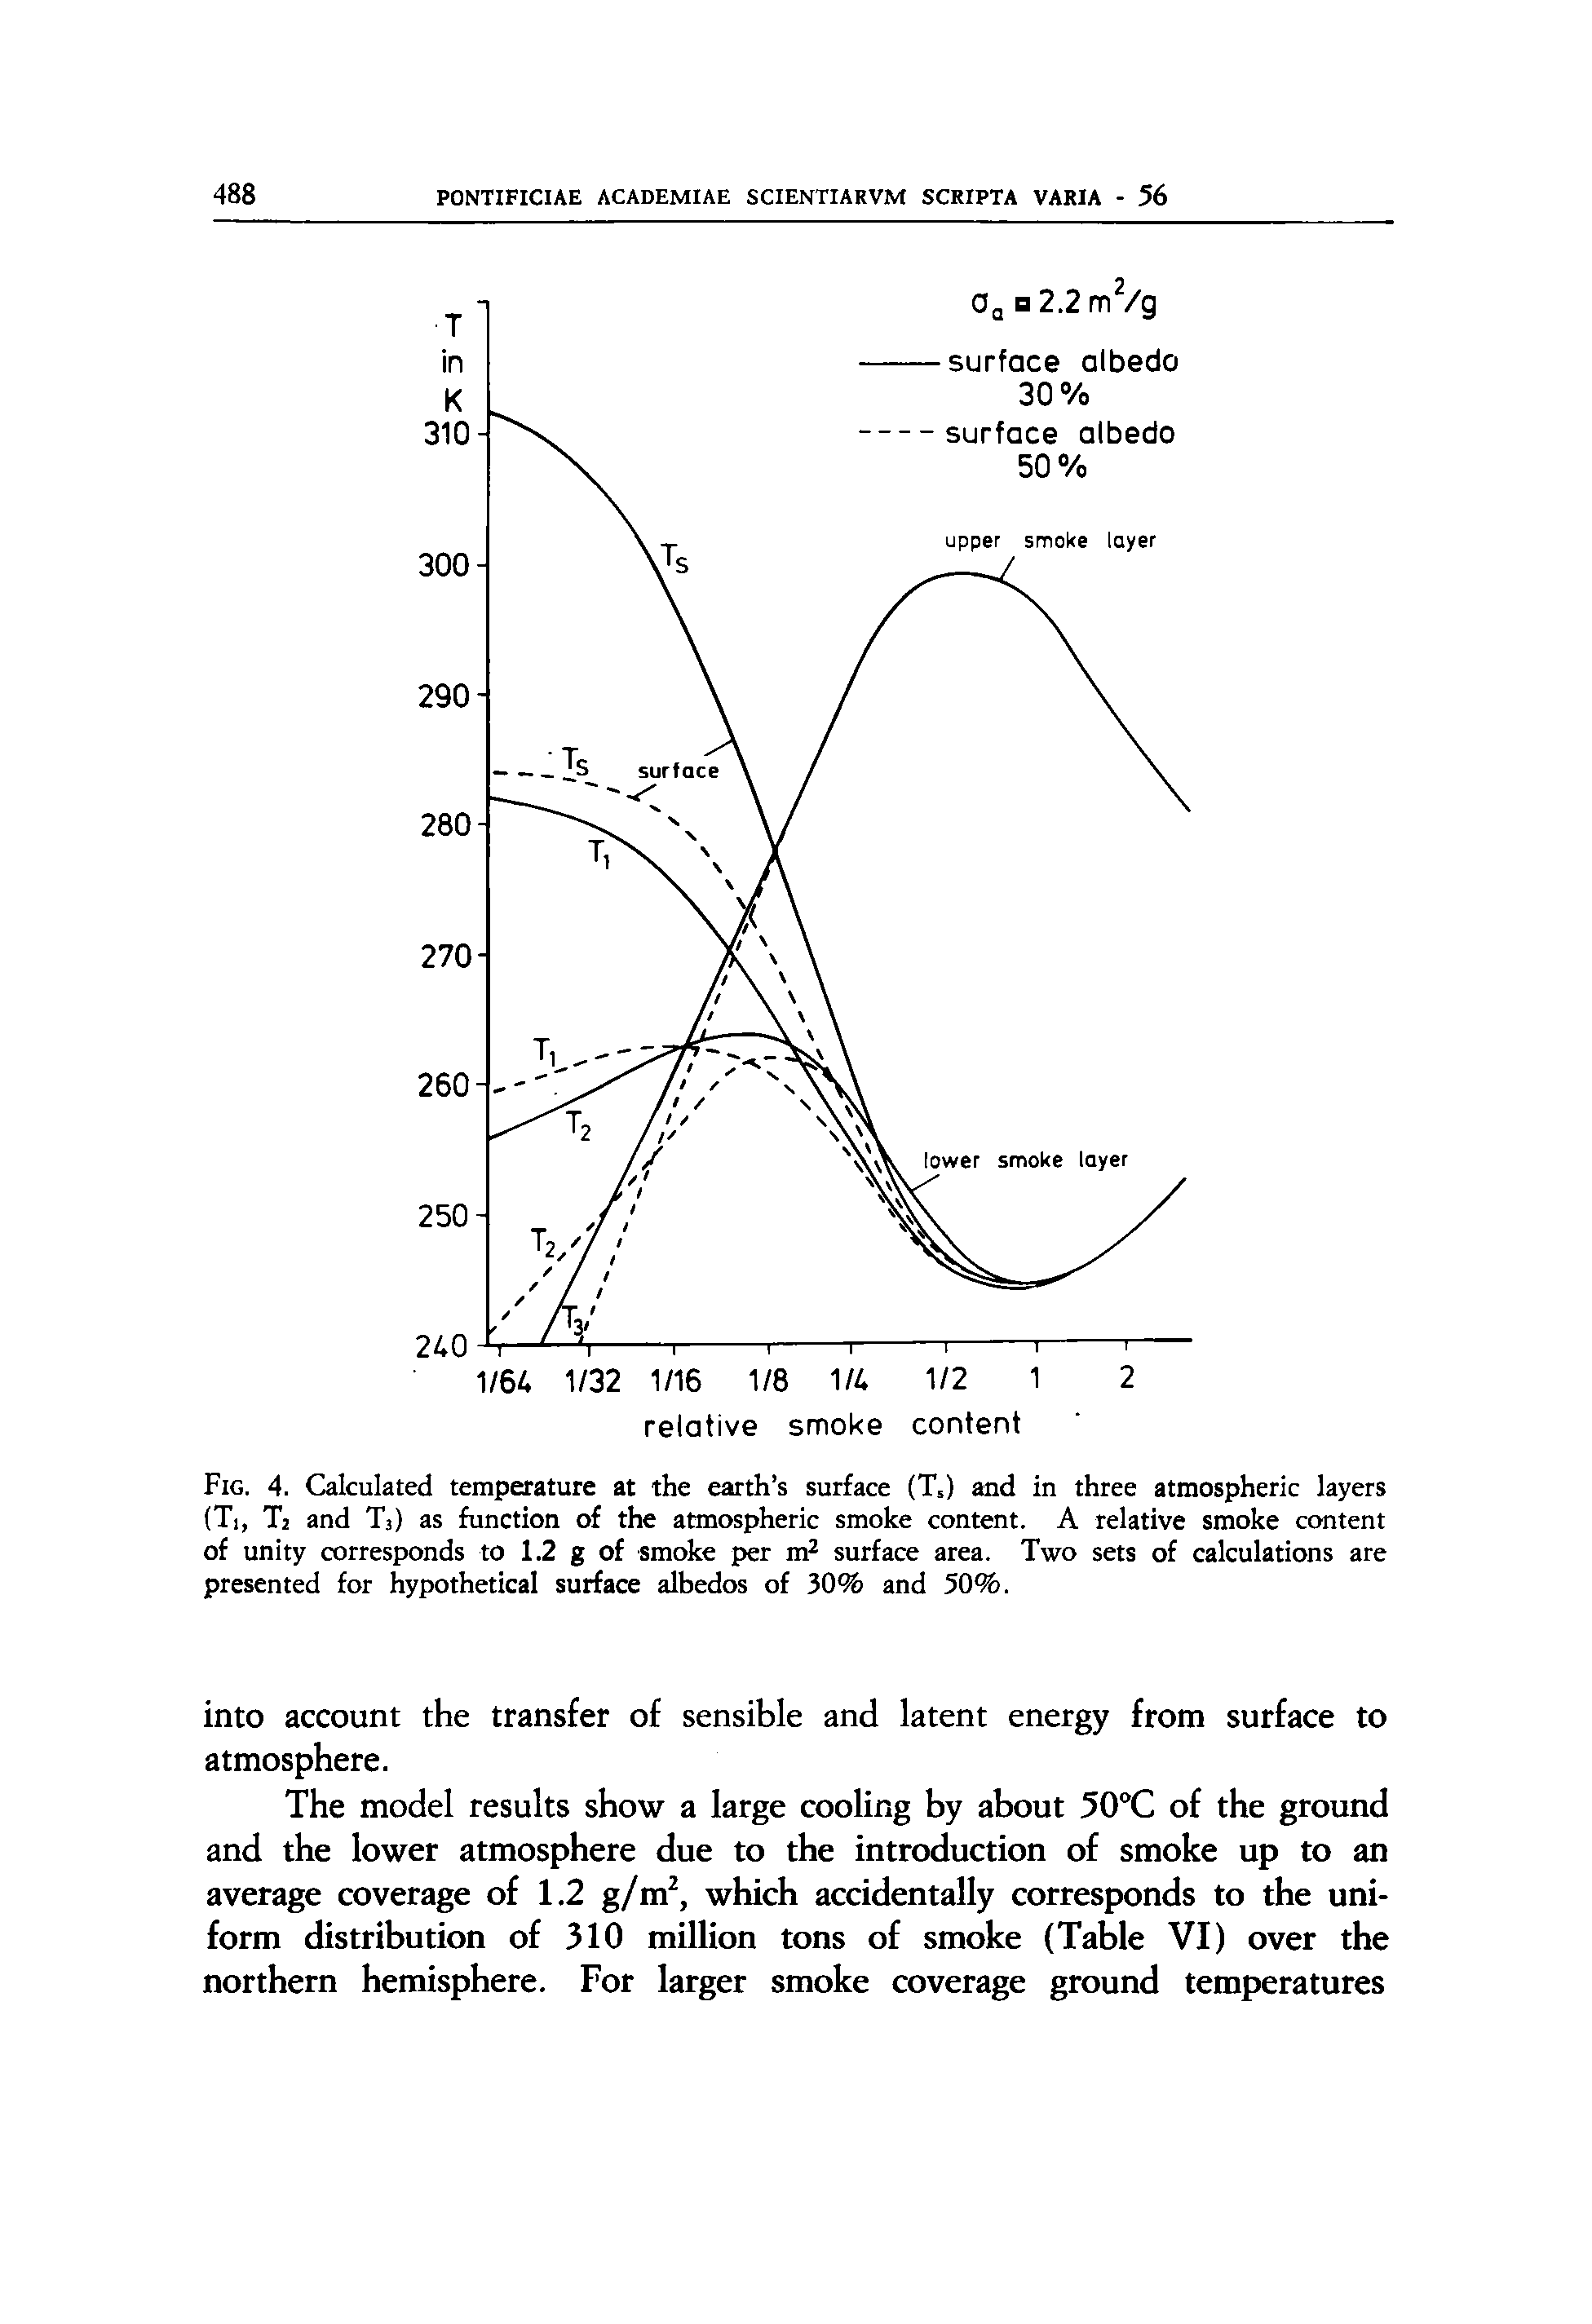 Fig. 4. Calculated temperature at the earth s surface (T.) and in three atmospheric layers (Ti, Tj and T3) as function of the atmospheric smoke content. A relative smoke content of unity corresponds to 1.2 g of smoke per m surface area. Two sets of calculations are presented for hypothetical surface albedos of 30% and 50%.